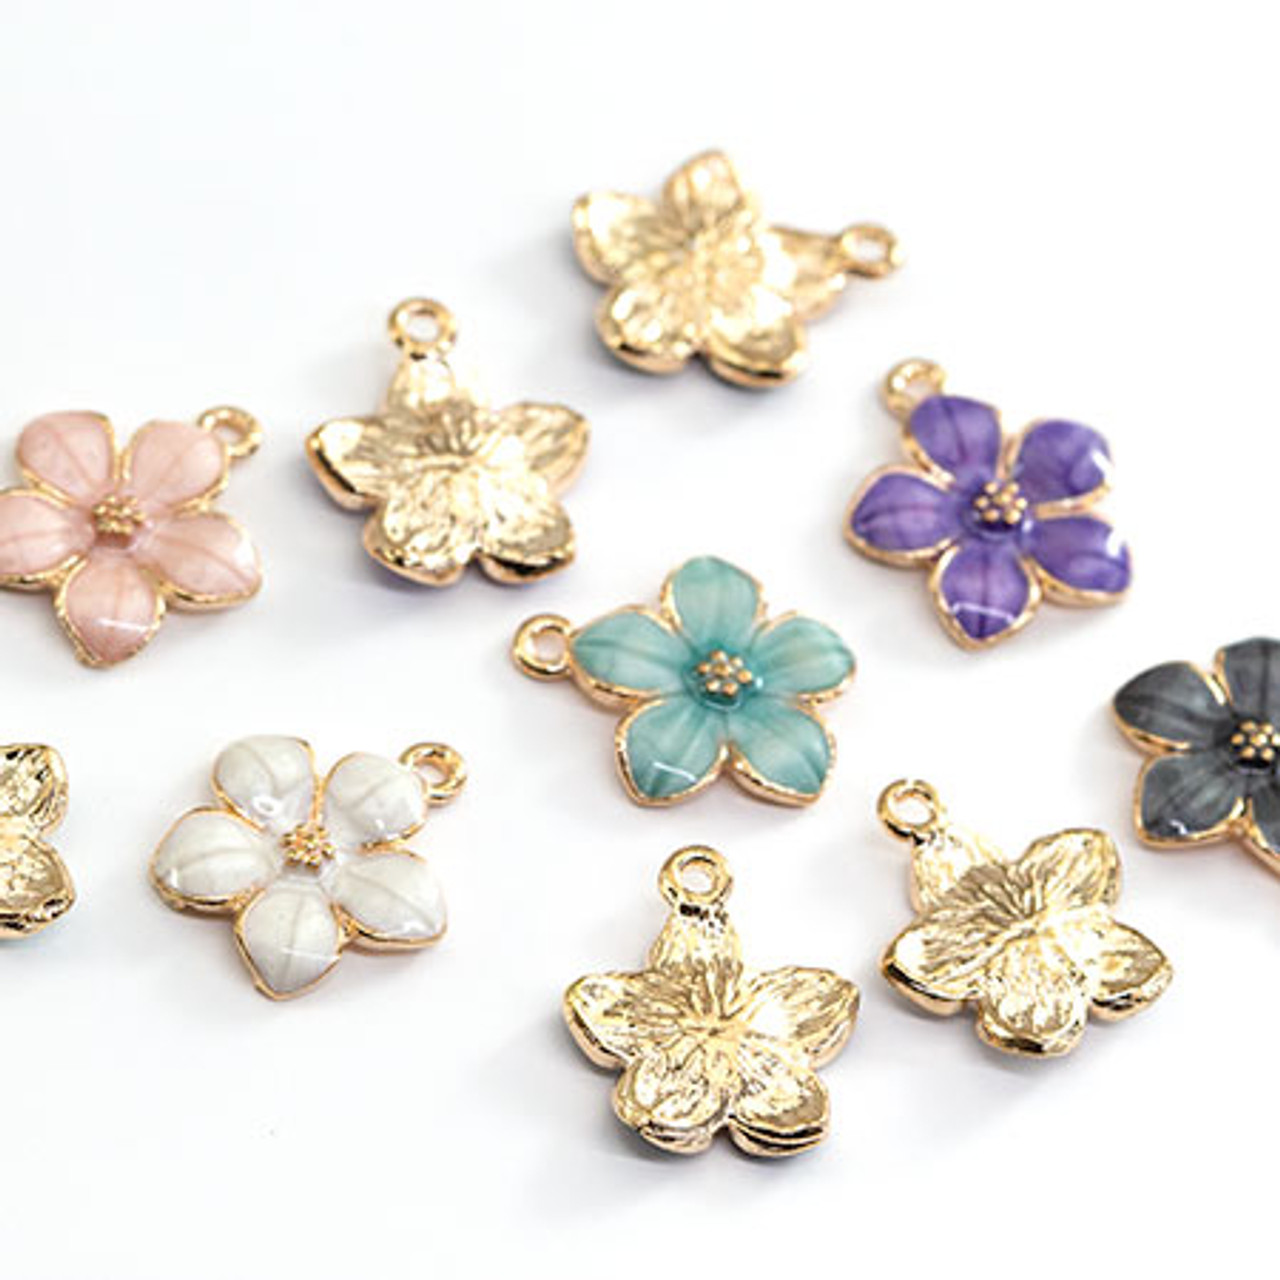 10pcs 3D Flower Enamel Charms Handmade Craft Metal Charms for Keychains  Earring DIY Jewelry Making 12x14mm